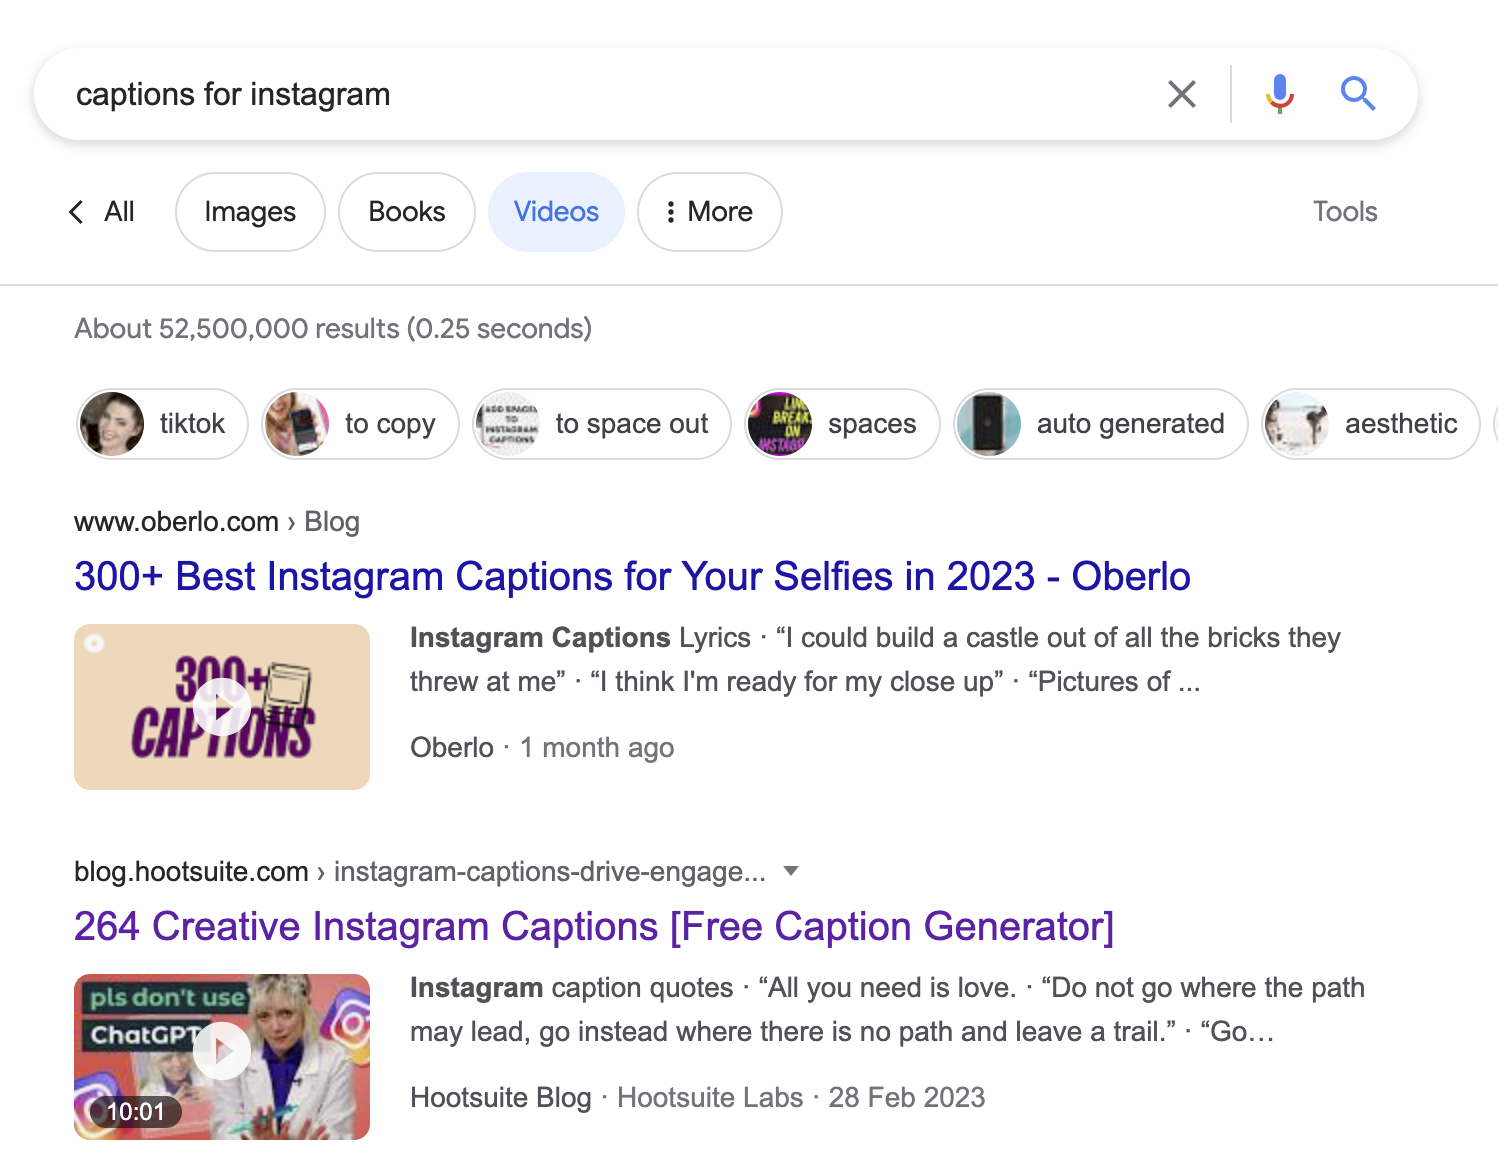 Top Pages on Google's SERP for the keyword "captions for Instagram."